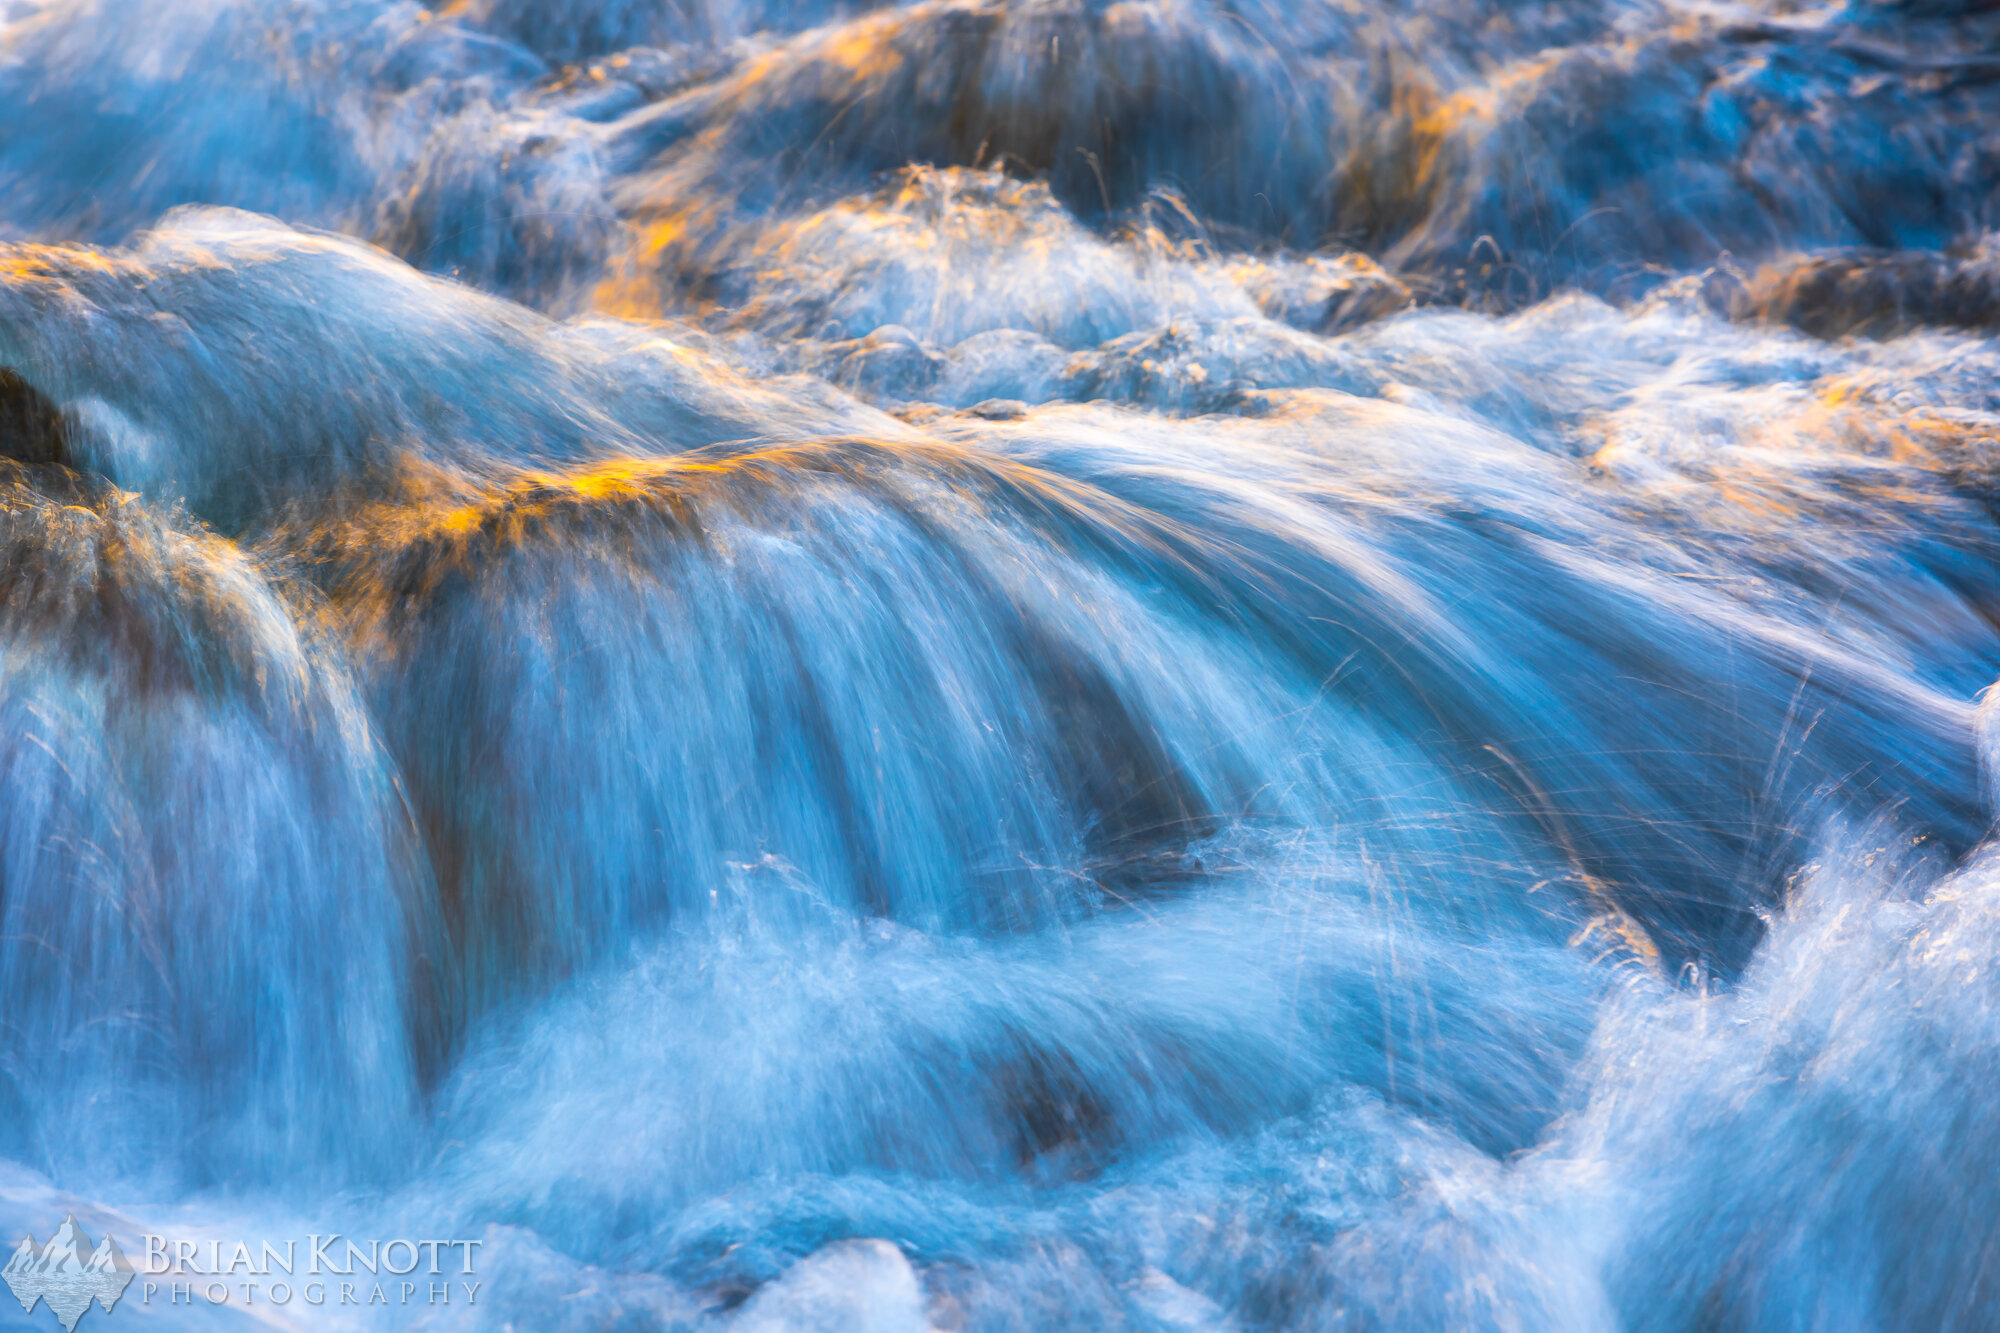 Abstract of a high Sierra stream.